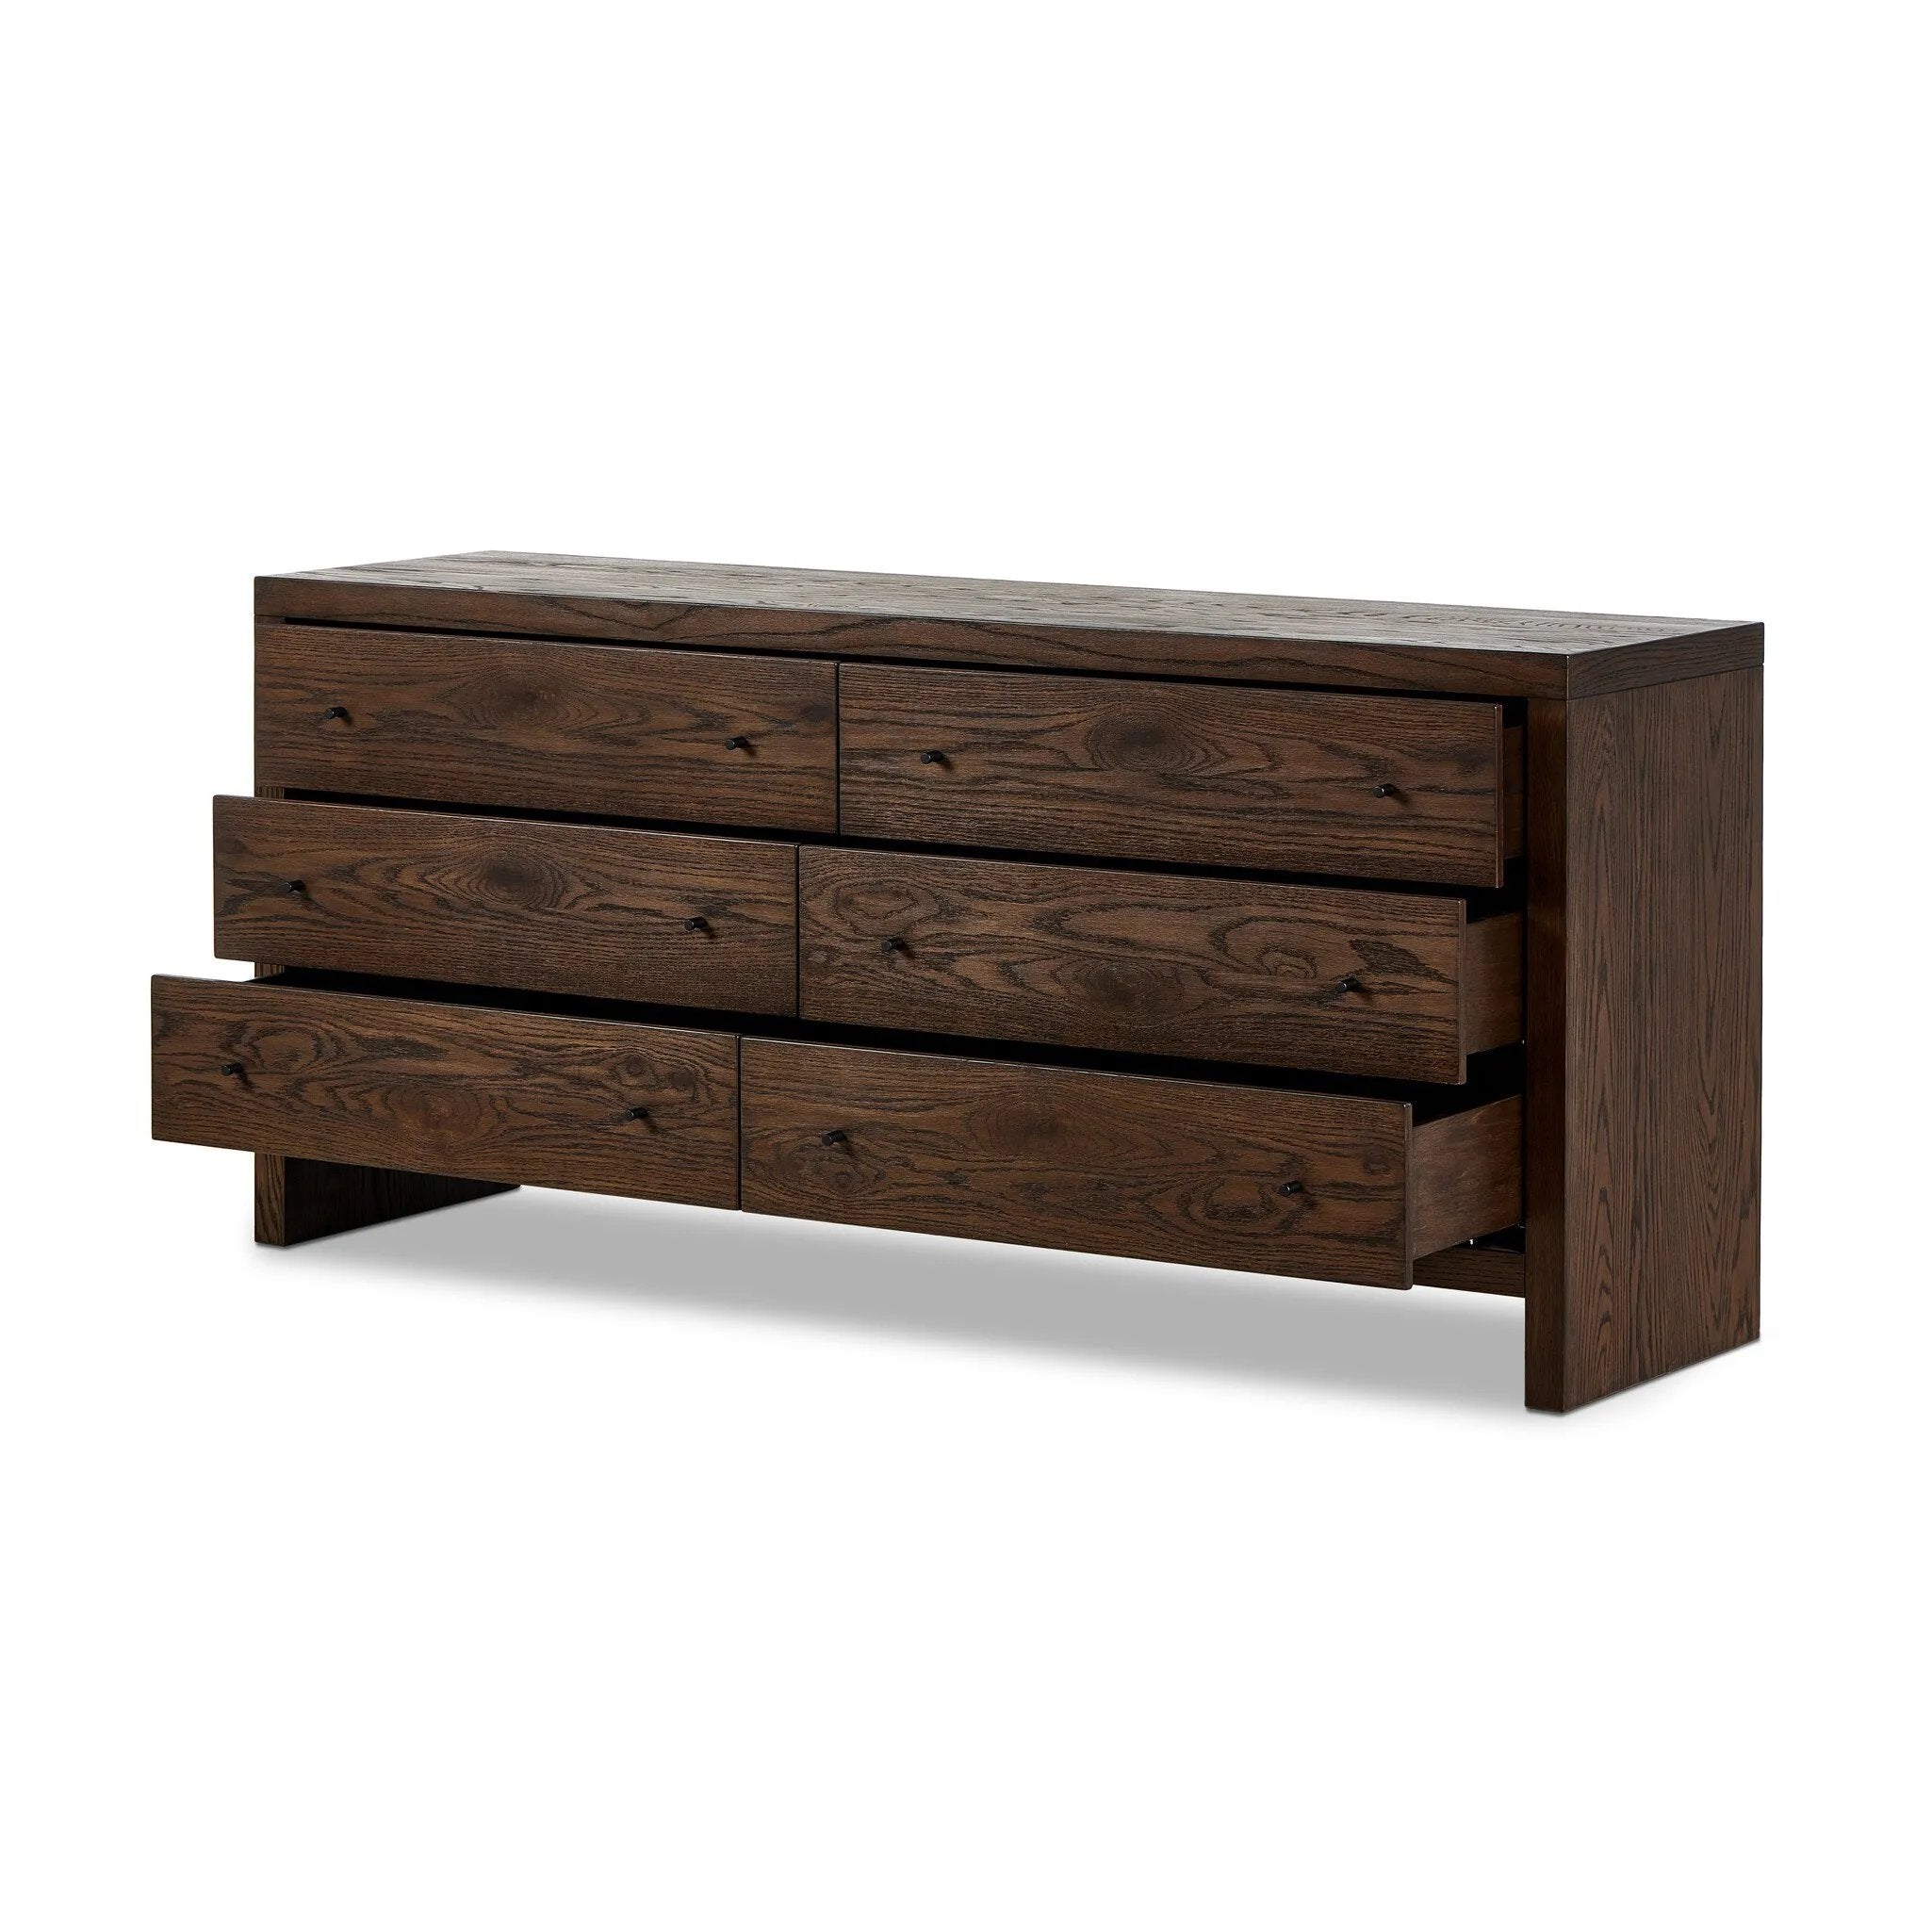 Straight planks of solid umber oak and veneer encase this spacious dresser for an understated modern look. Deep wood grain adds natural character.Collection: Hamilto Amethyst Home provides interior design, new home construction design consulting, vintage area rugs, and lighting in the Park City metro area.